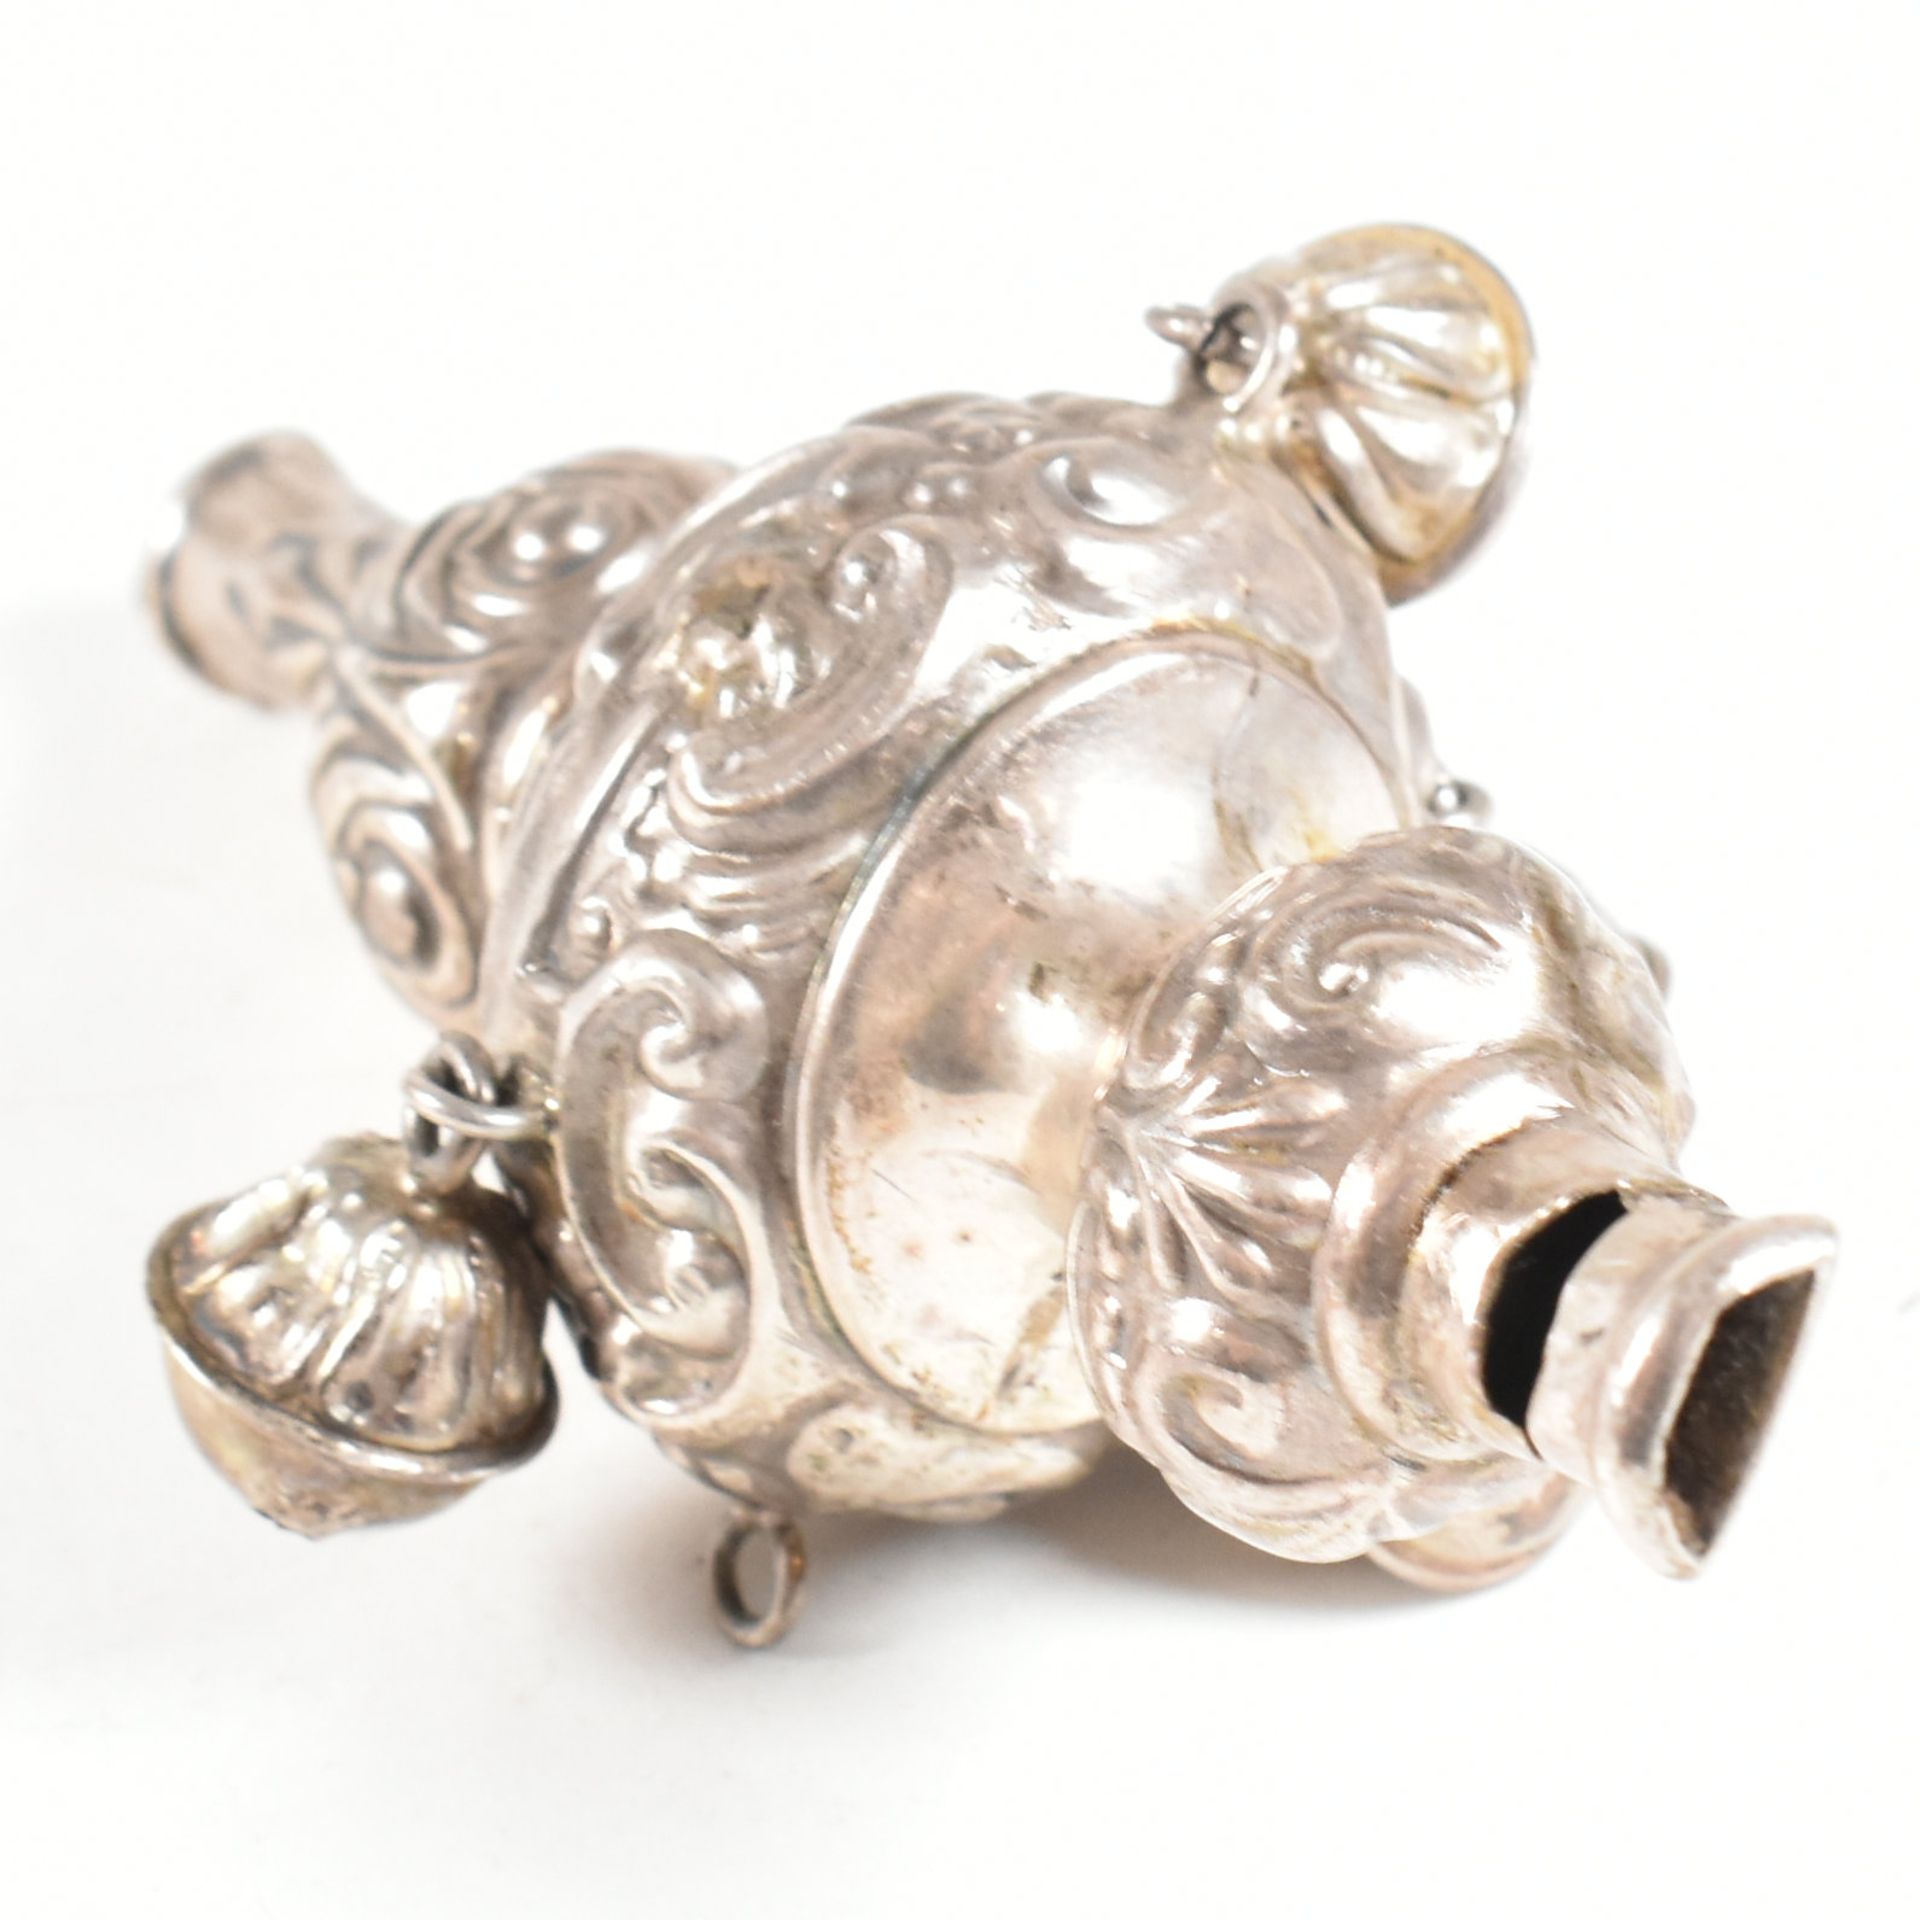 GEORGE V HALLMARKED SILVER BABYS COMBINATION RATTLE WHISTLE - Image 6 of 6